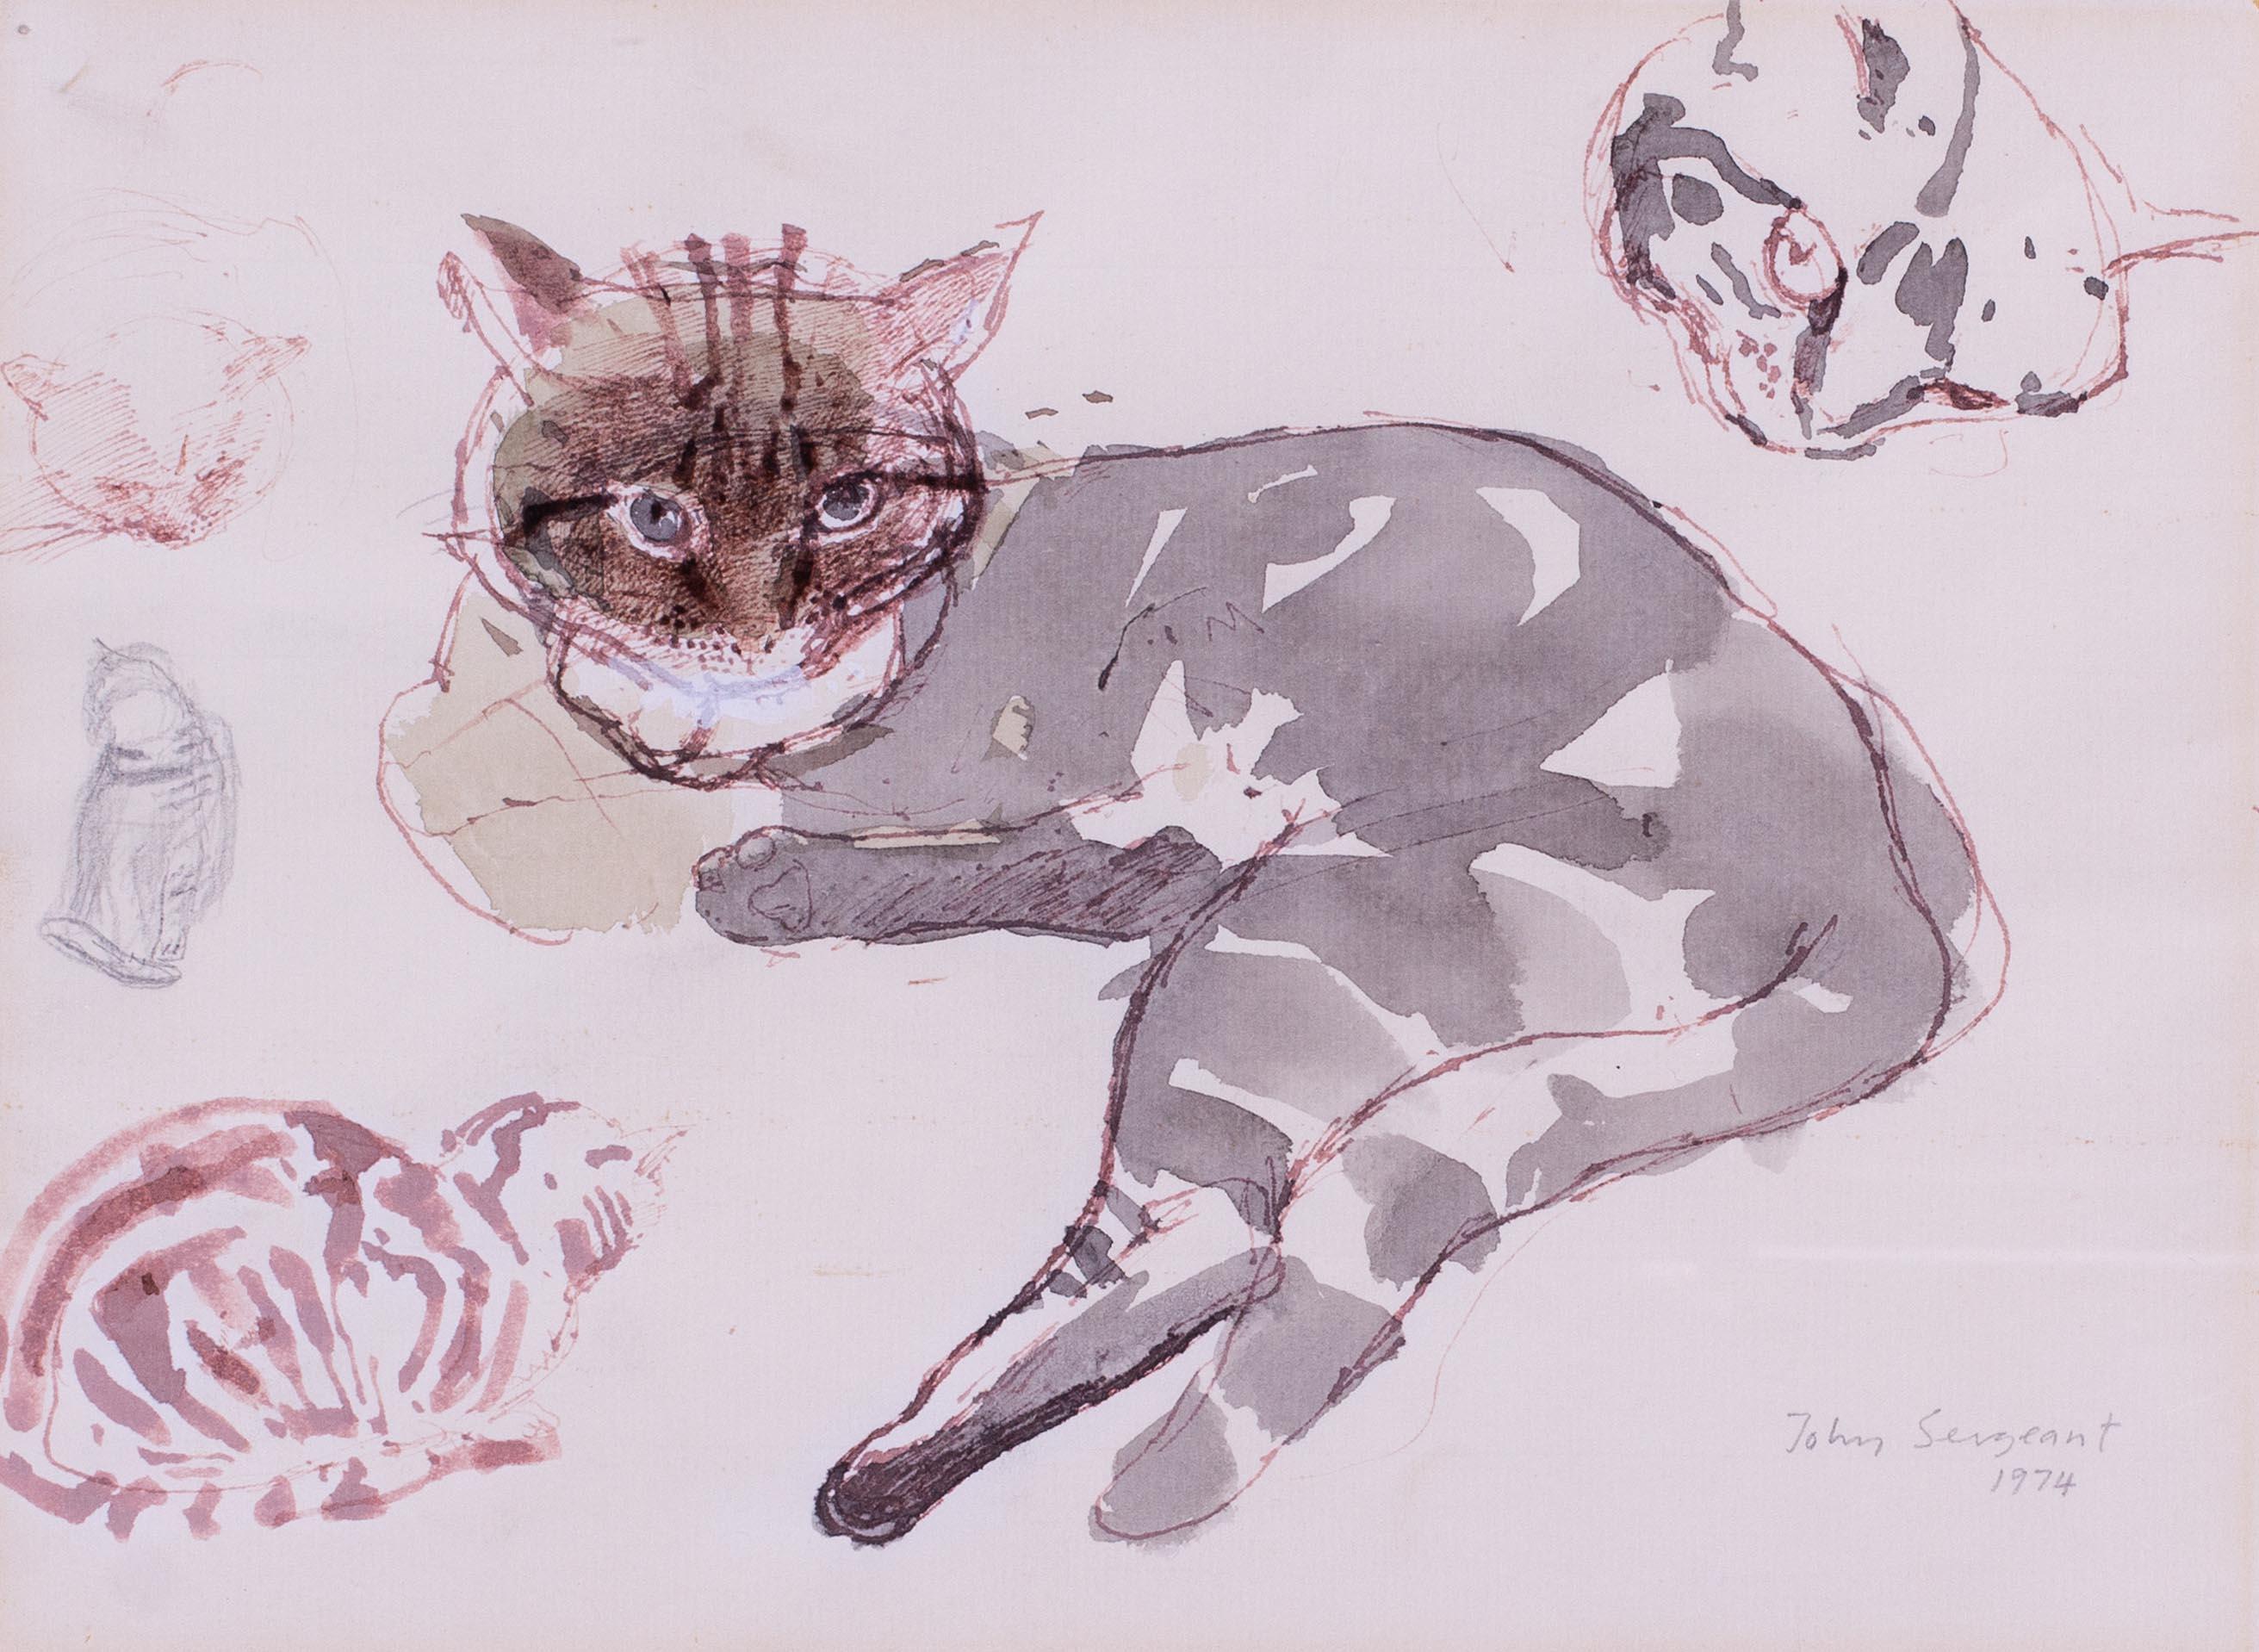 'Studies of a tabby cat', mixed media on paper by British artist John Sergeant For Sale 1